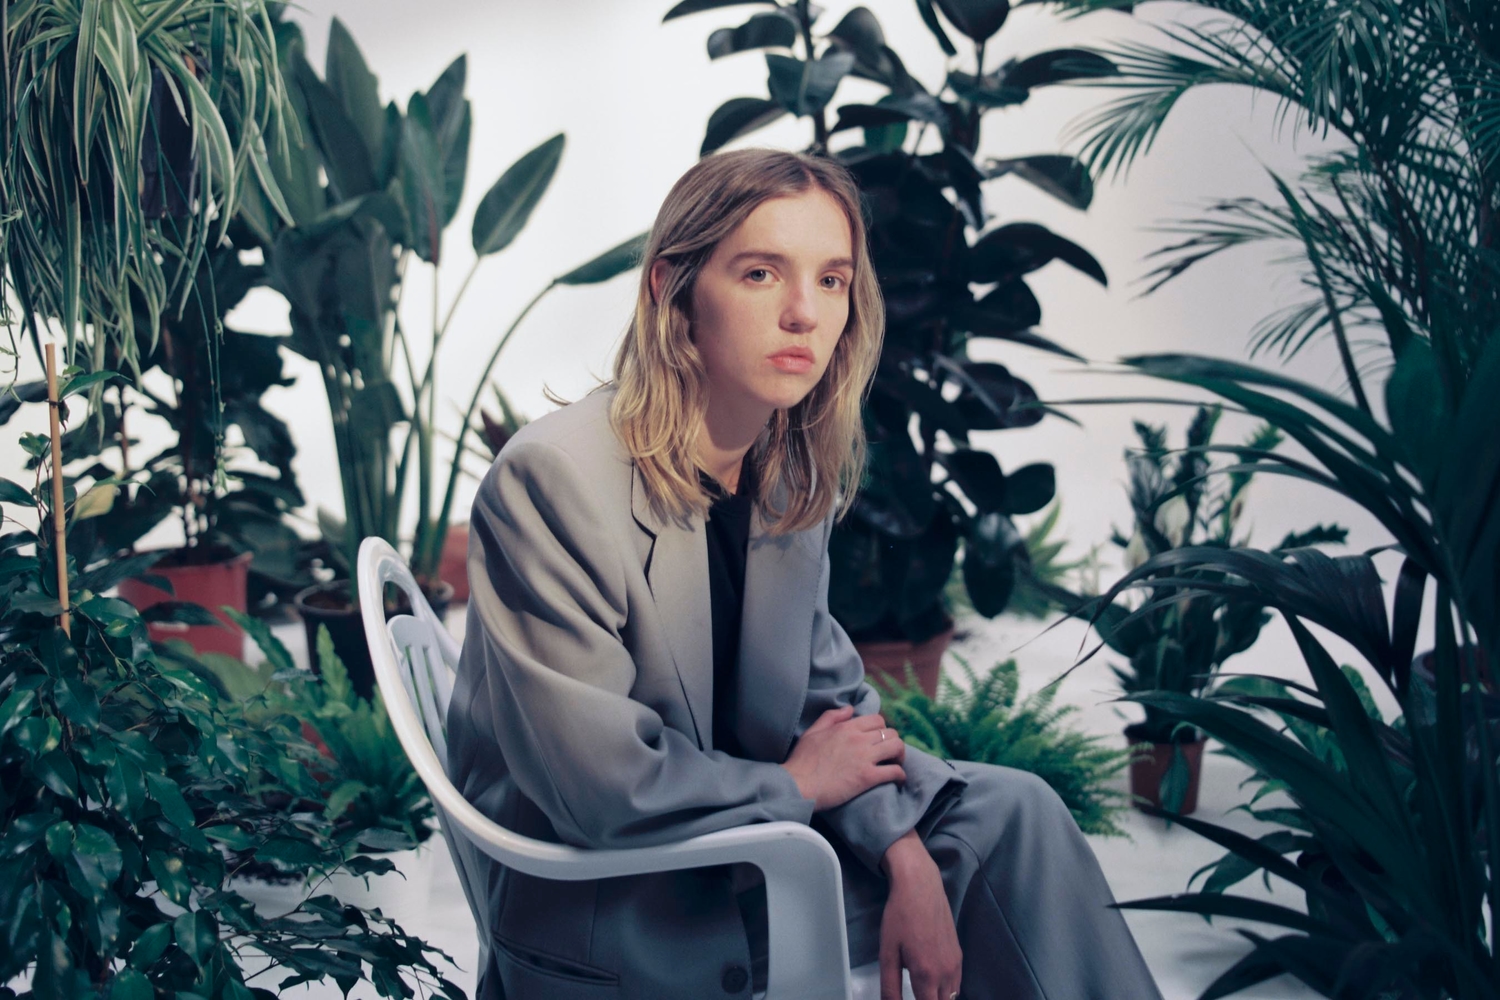 The Japanese House returns with 'Something Has To Change'